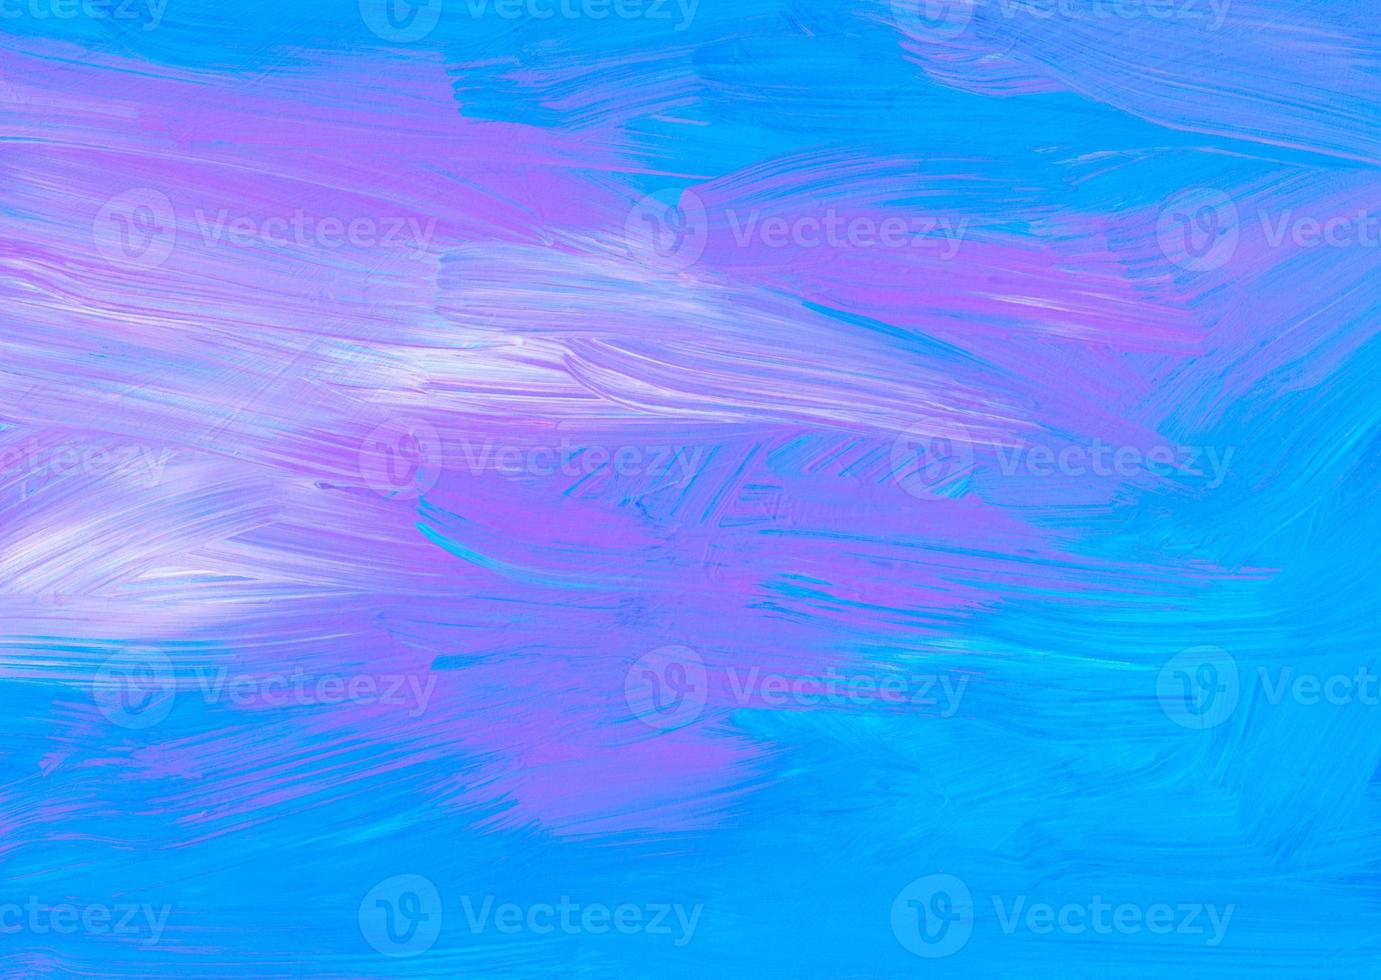 Abstract Background With Light Blue And Purple Acrylic Paint Stock Photo,  Picture and Royalty Free Image. Image 110794609.